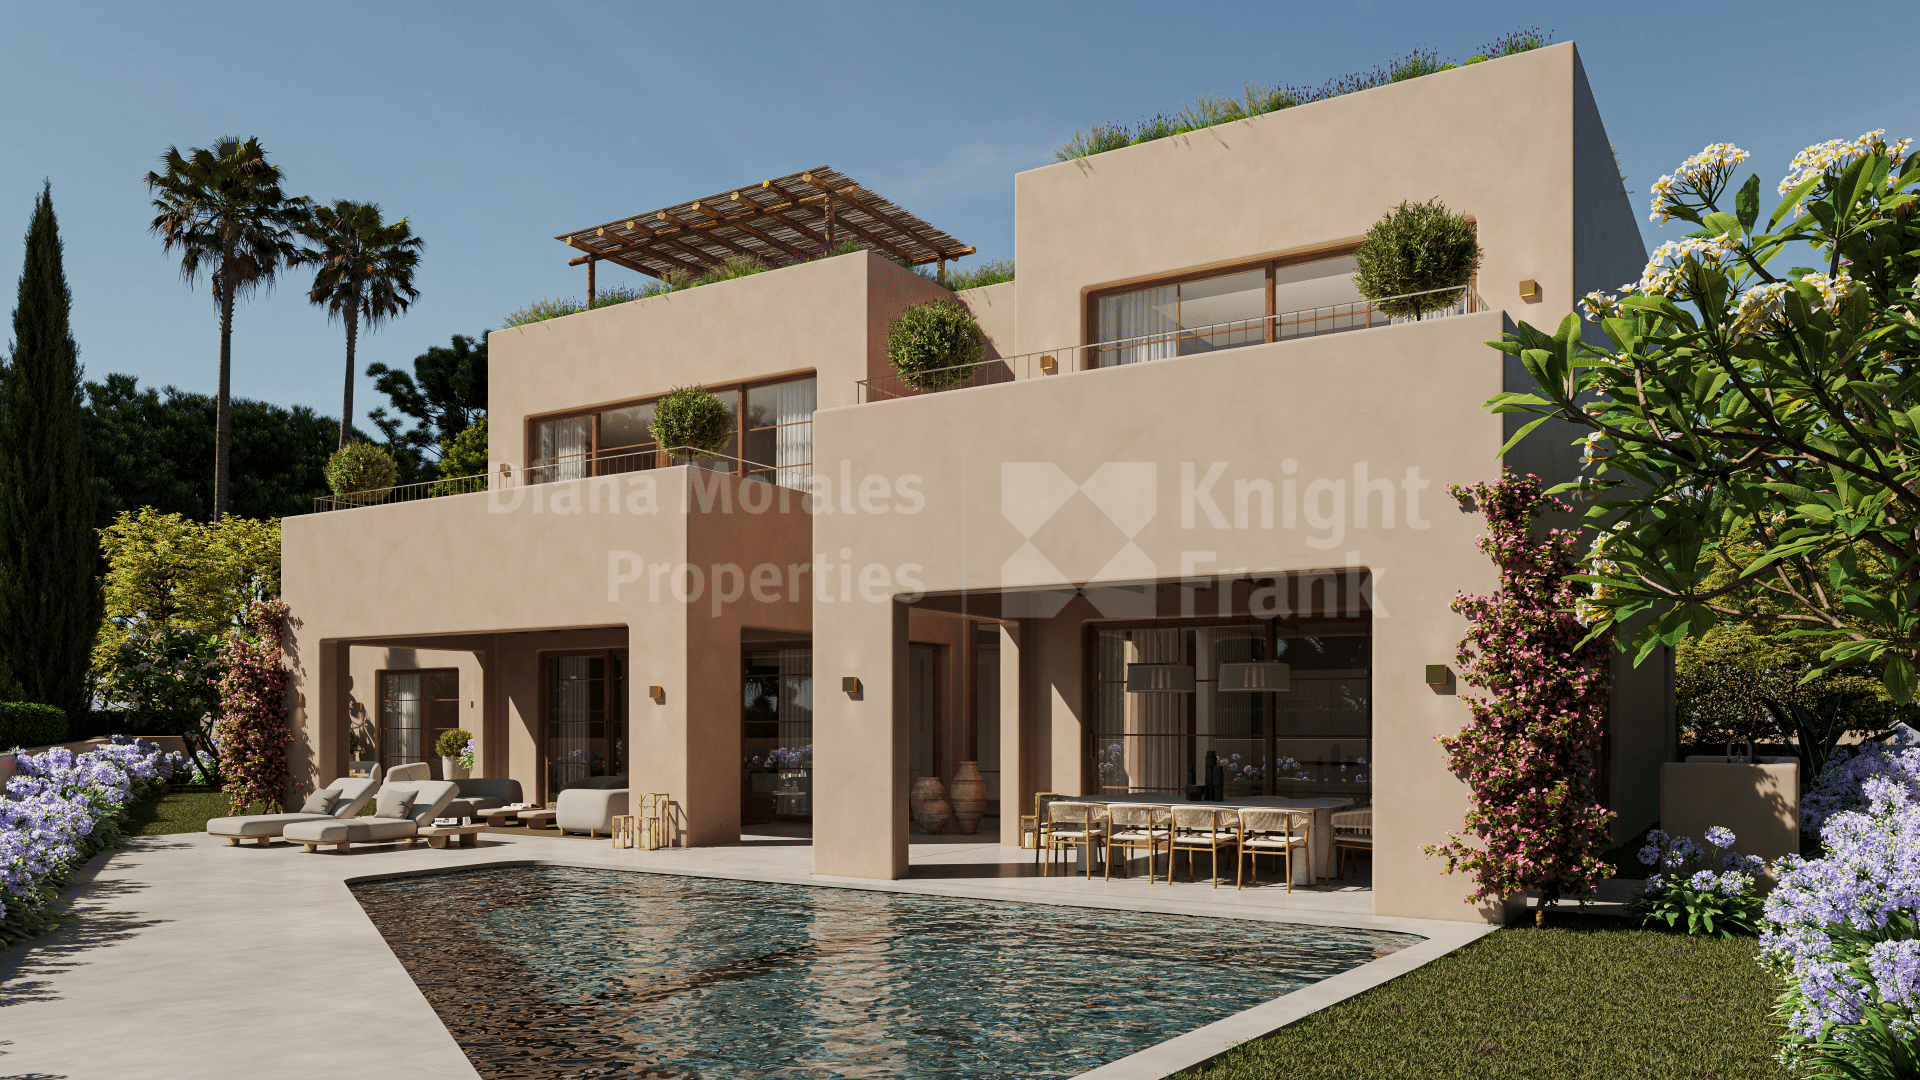 Plot with project and licence in Casablanca, Marbella's Golden Mile